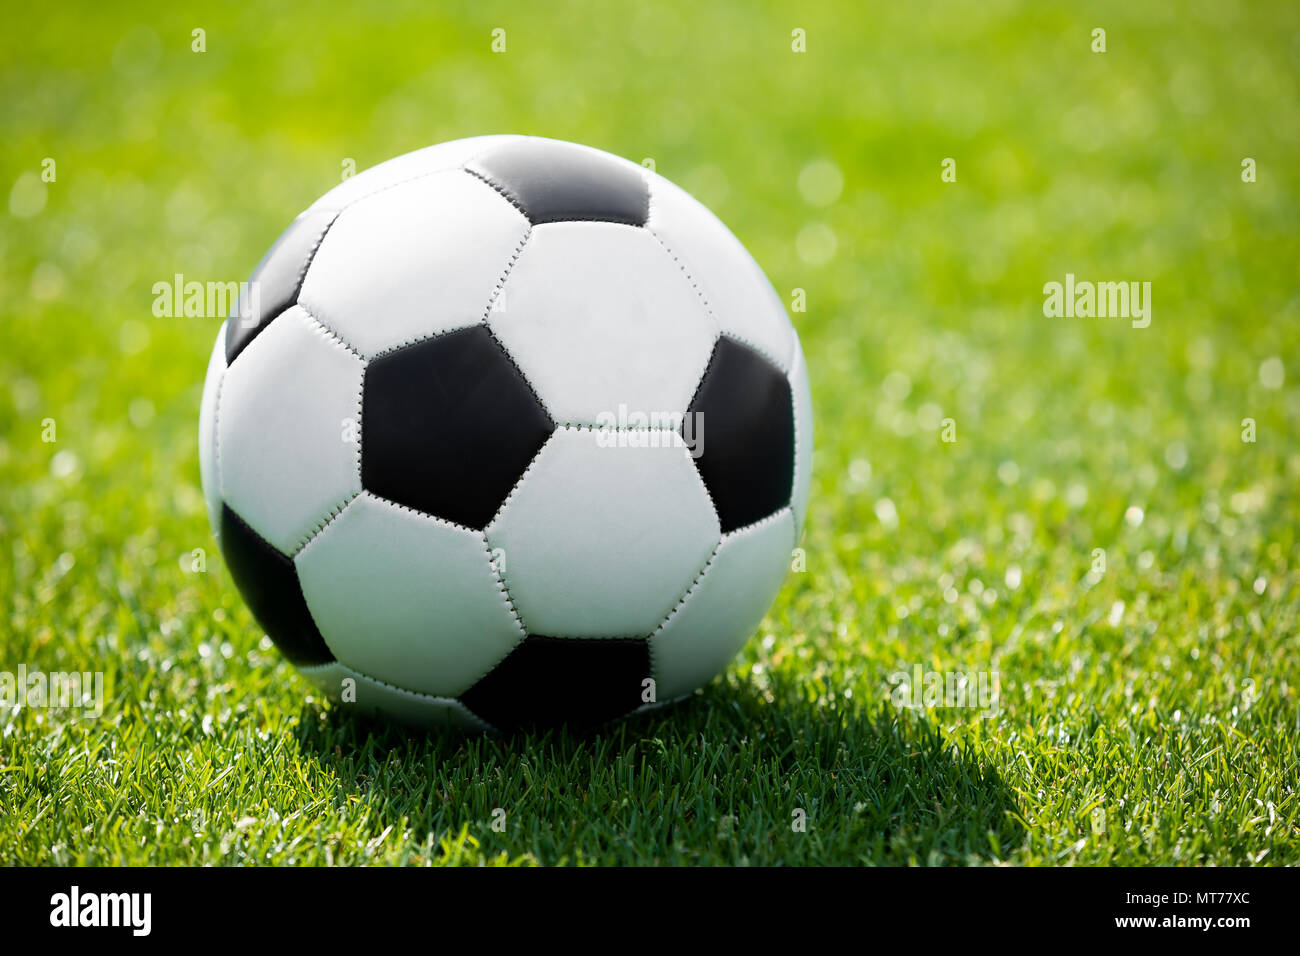 Soccer Ball on a Soccer Field. Green Grass Football Pitch. Soccer Turf in  the Background Stock Photo - Alamy